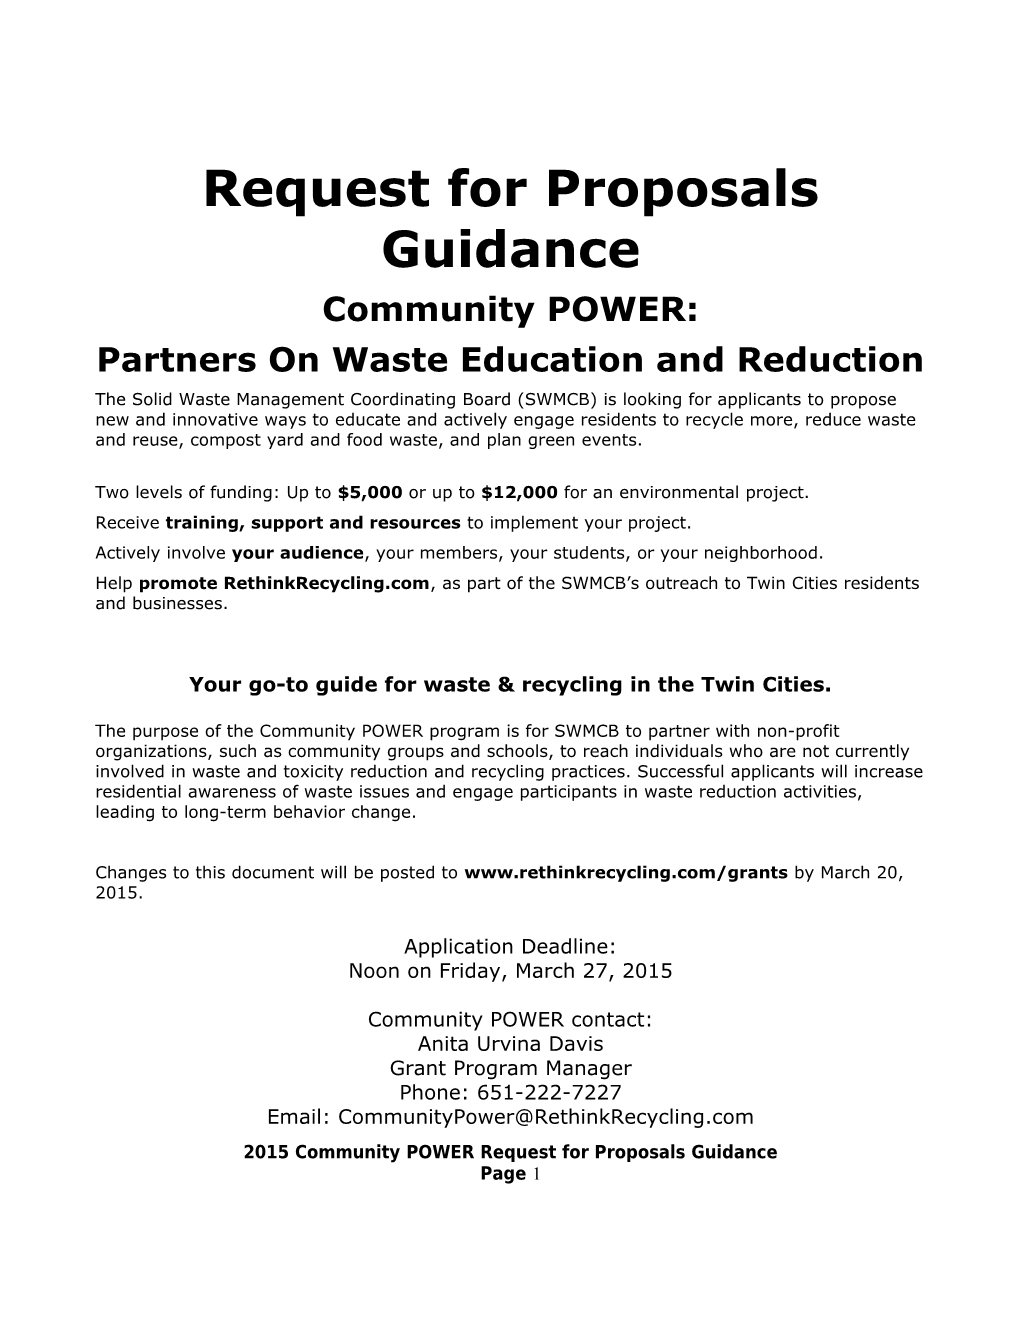 Partners on Waste Education and Reduction